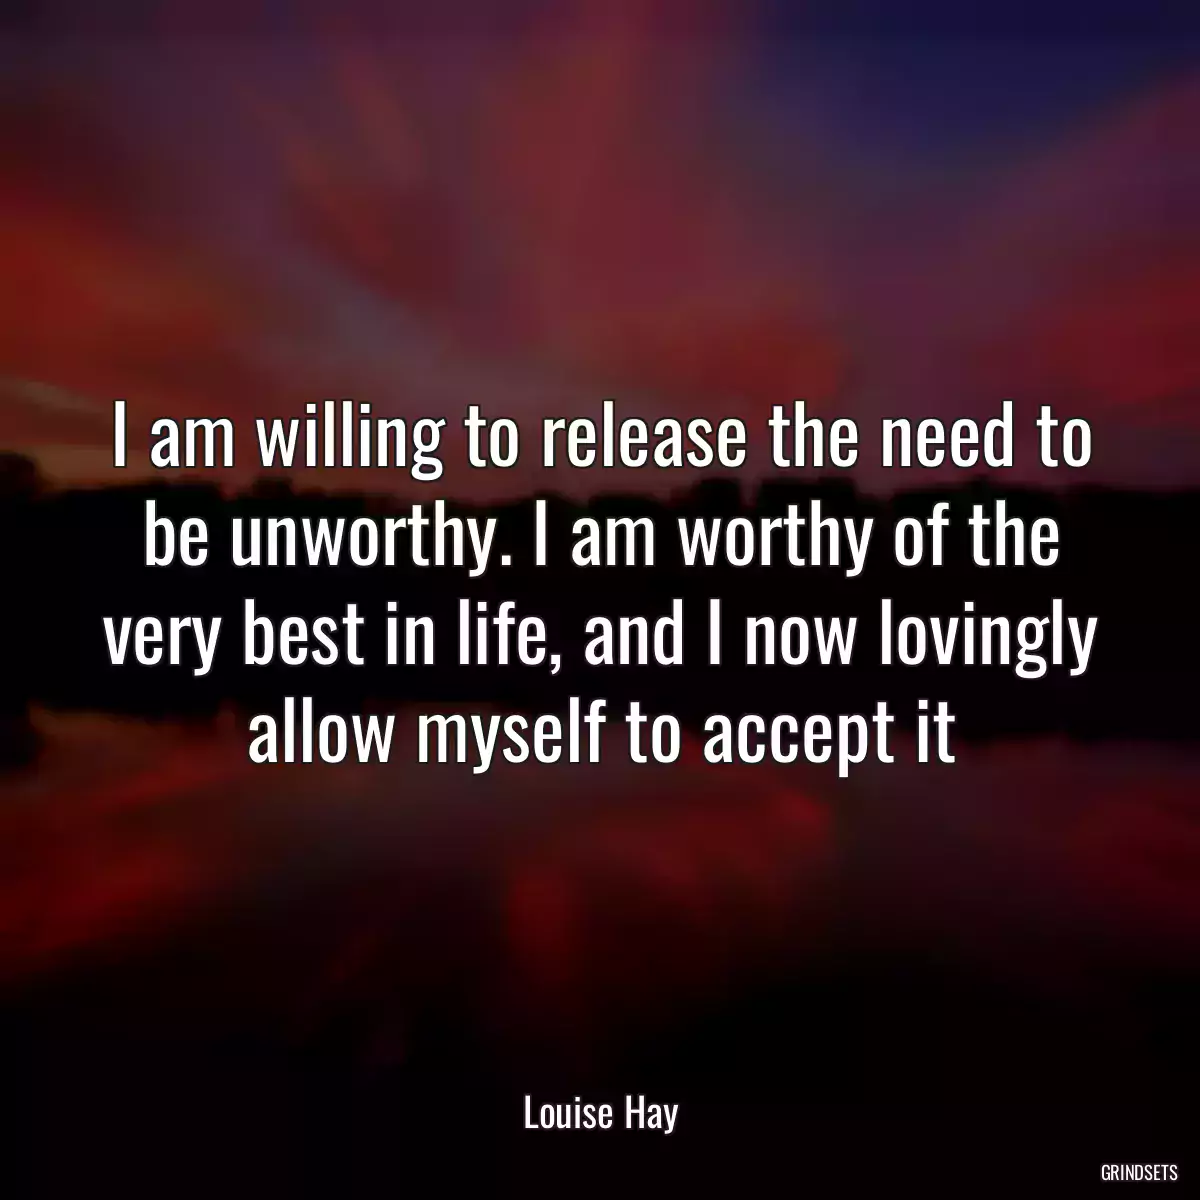 I am willing to release the need to be unworthy. I am worthy of the very best in life, and I now lovingly allow myself to accept it